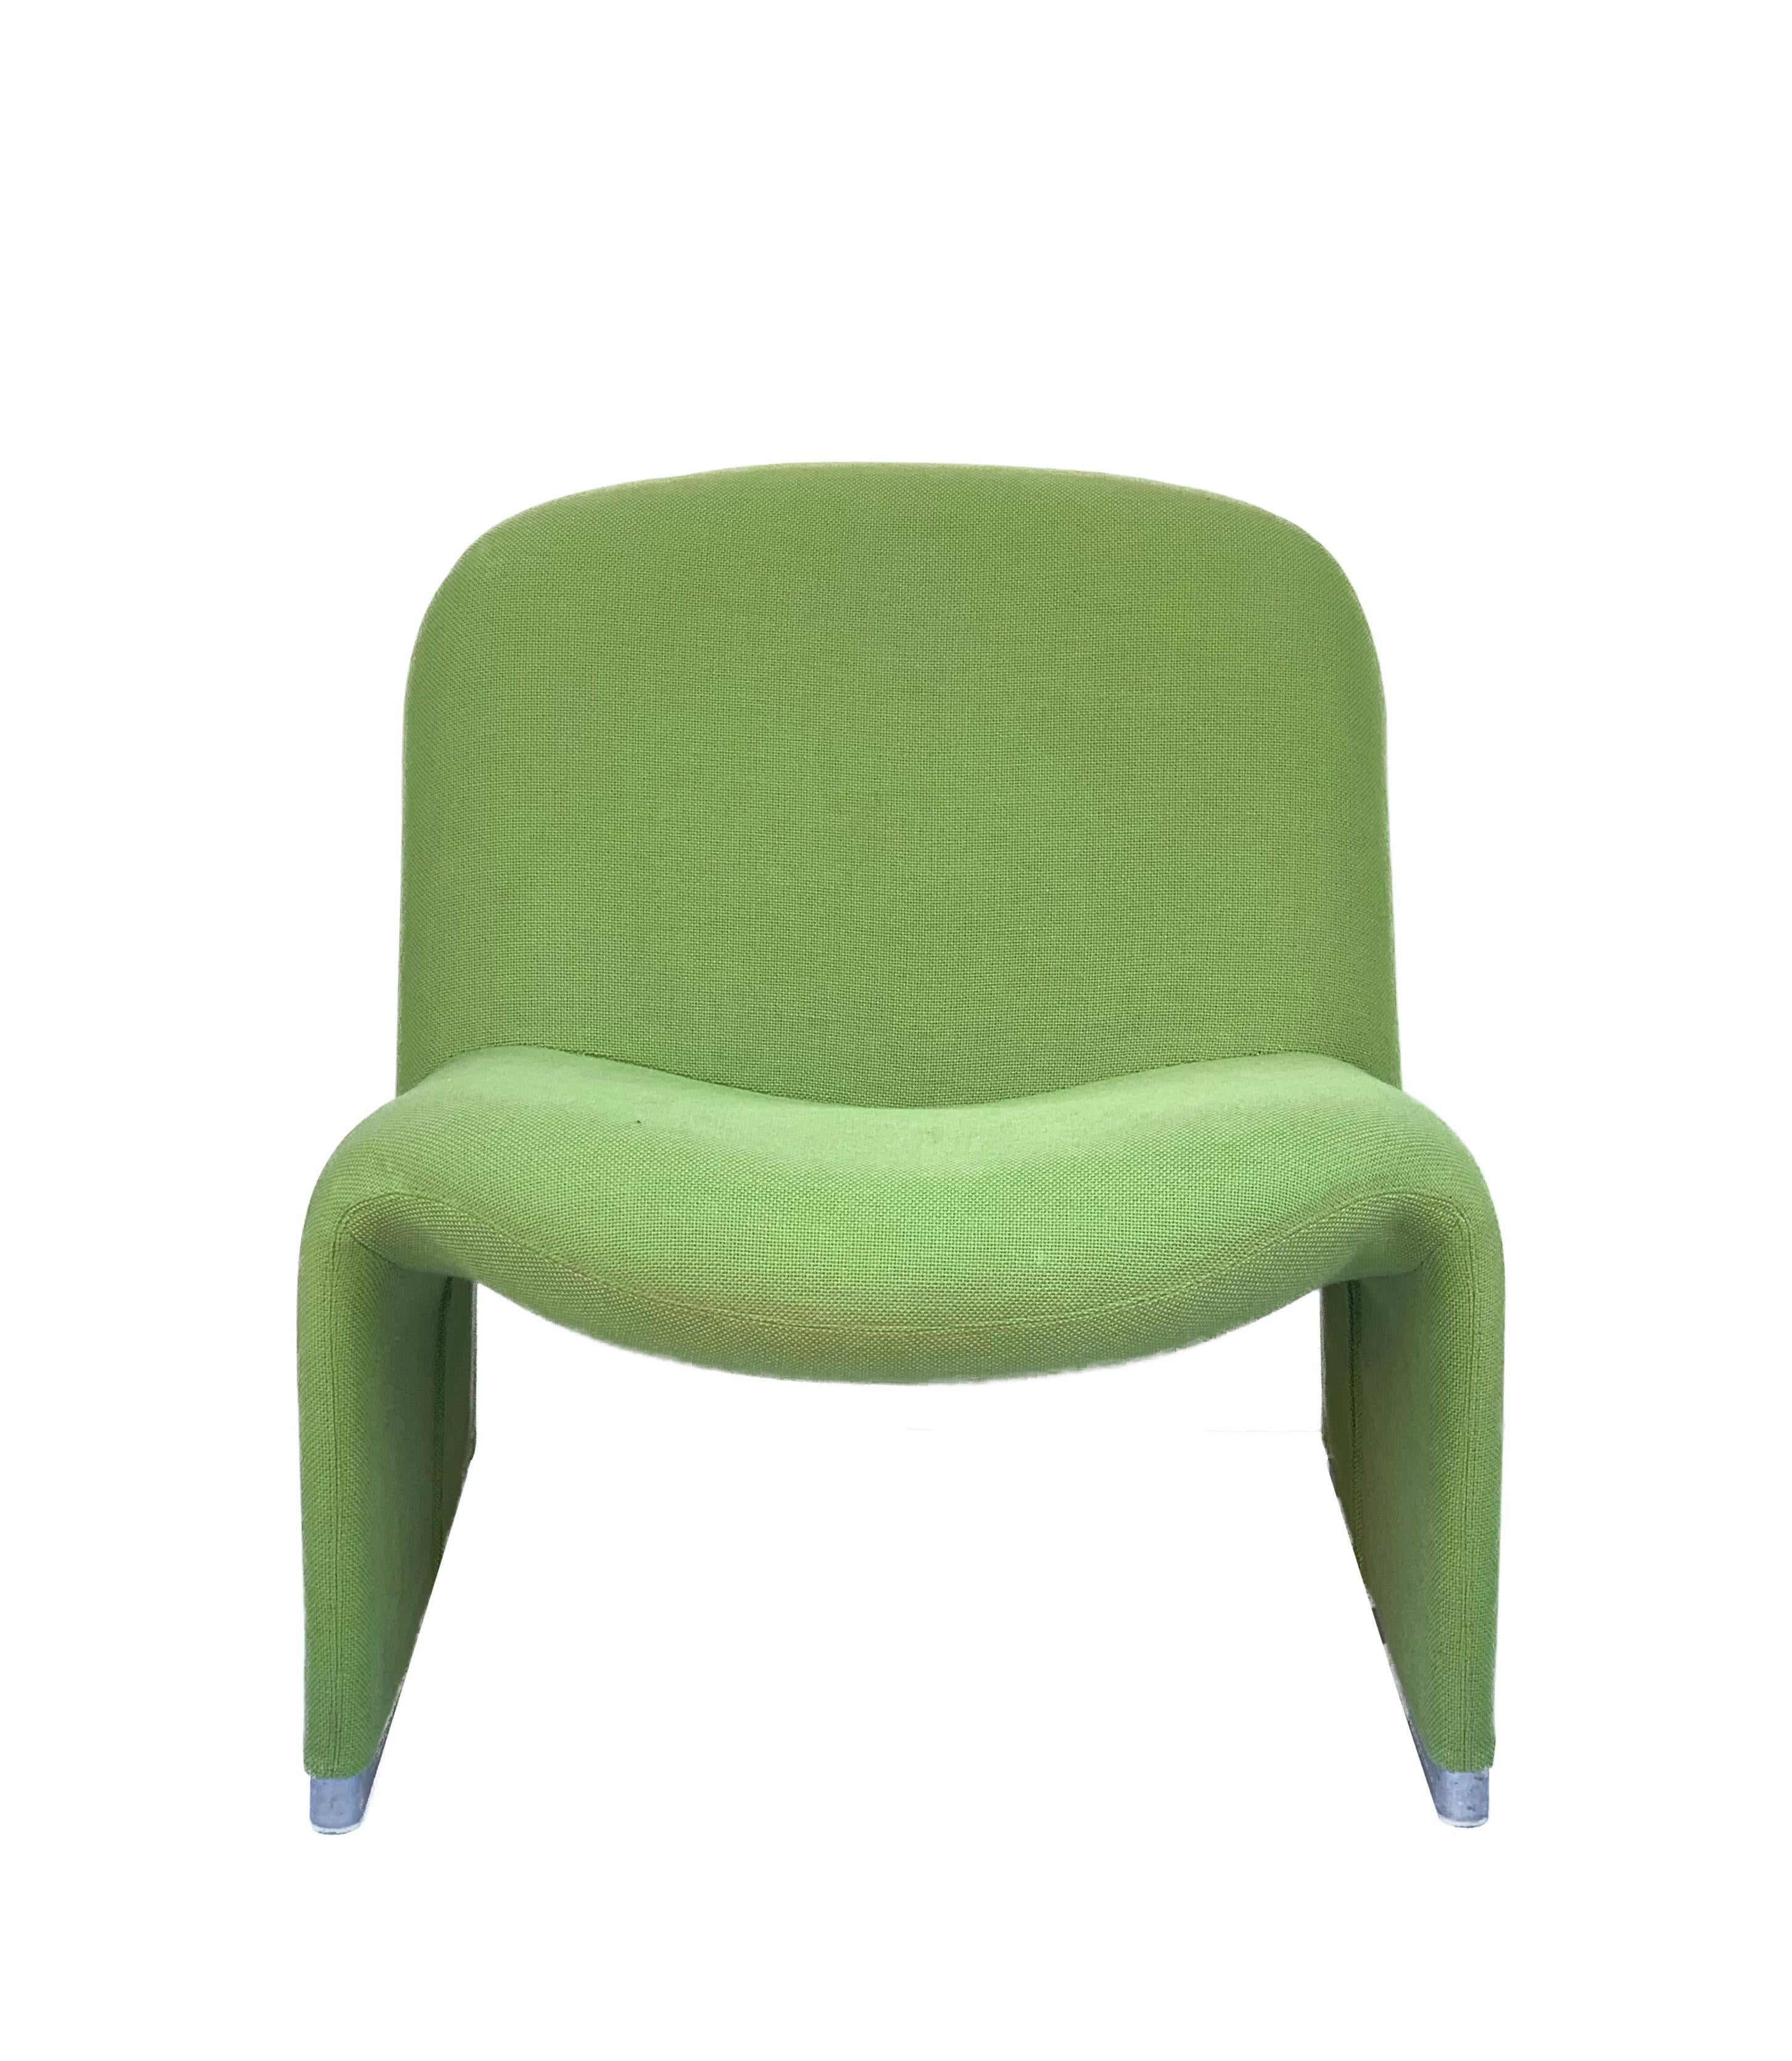 Italian Pair of Green Alky Armchairs by Giancarlo Piretti for Castelli, Italy, 1970s